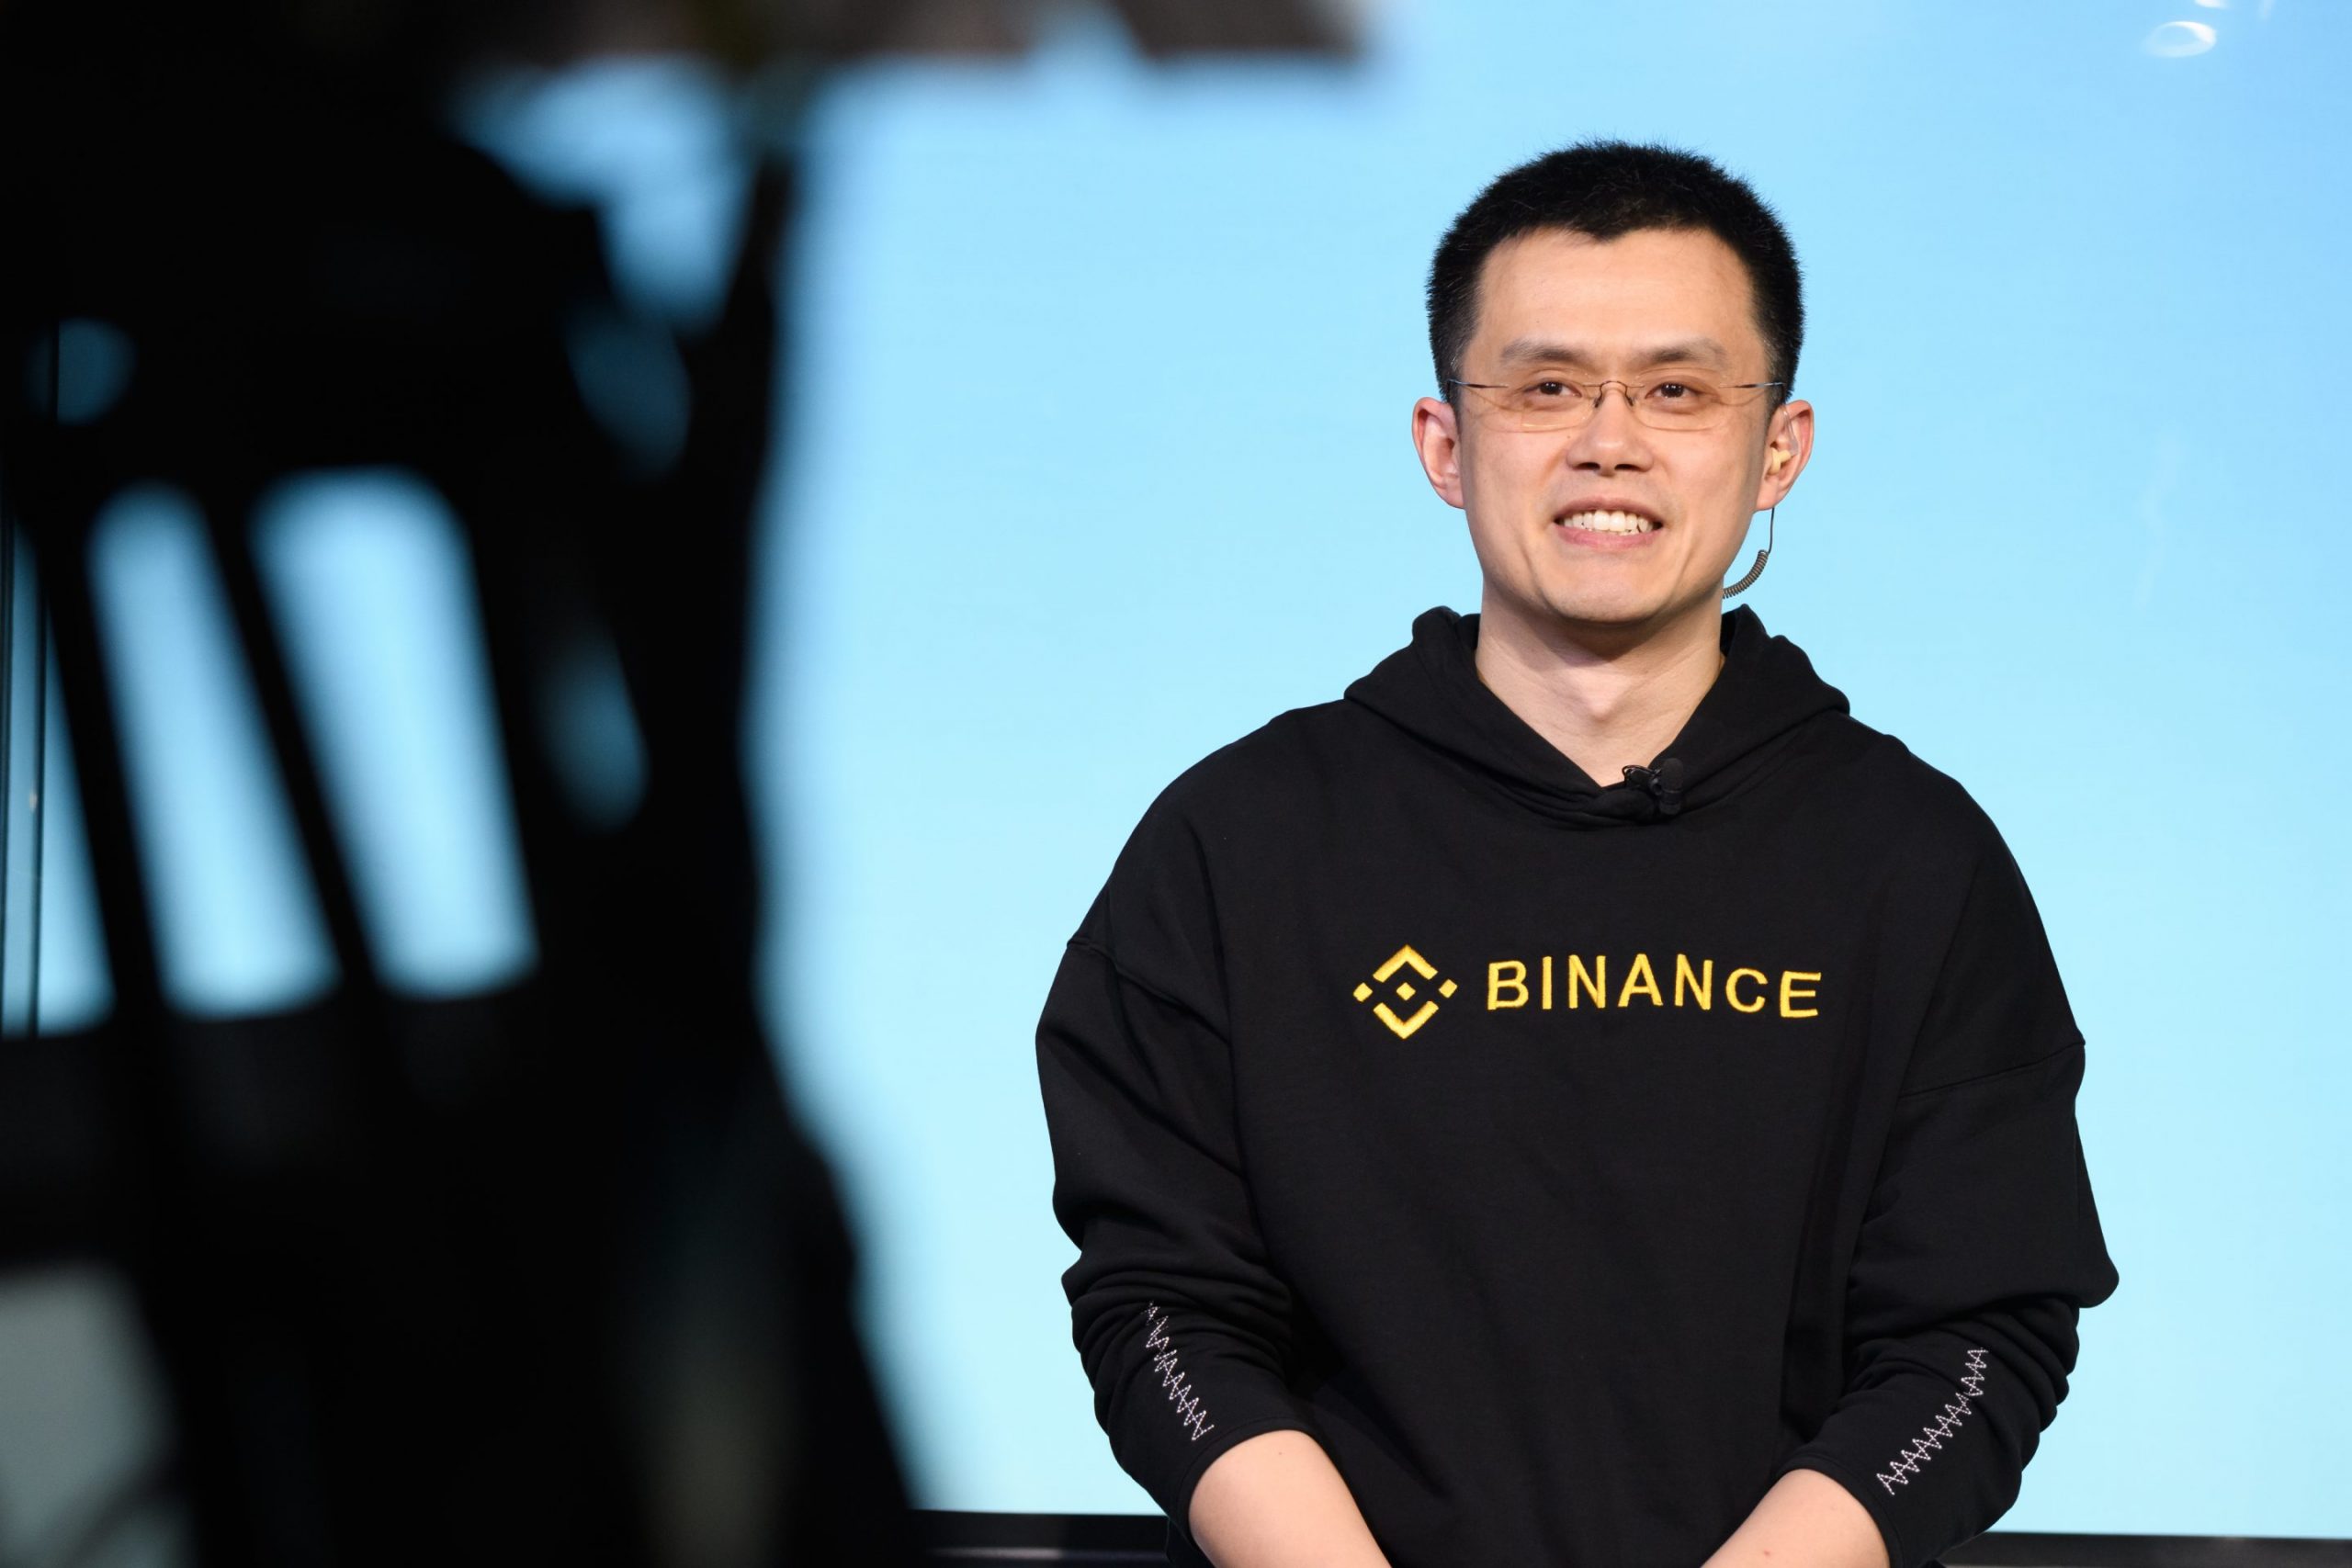 Wealthy crypto exchange founder of Binance claims he’s broke again